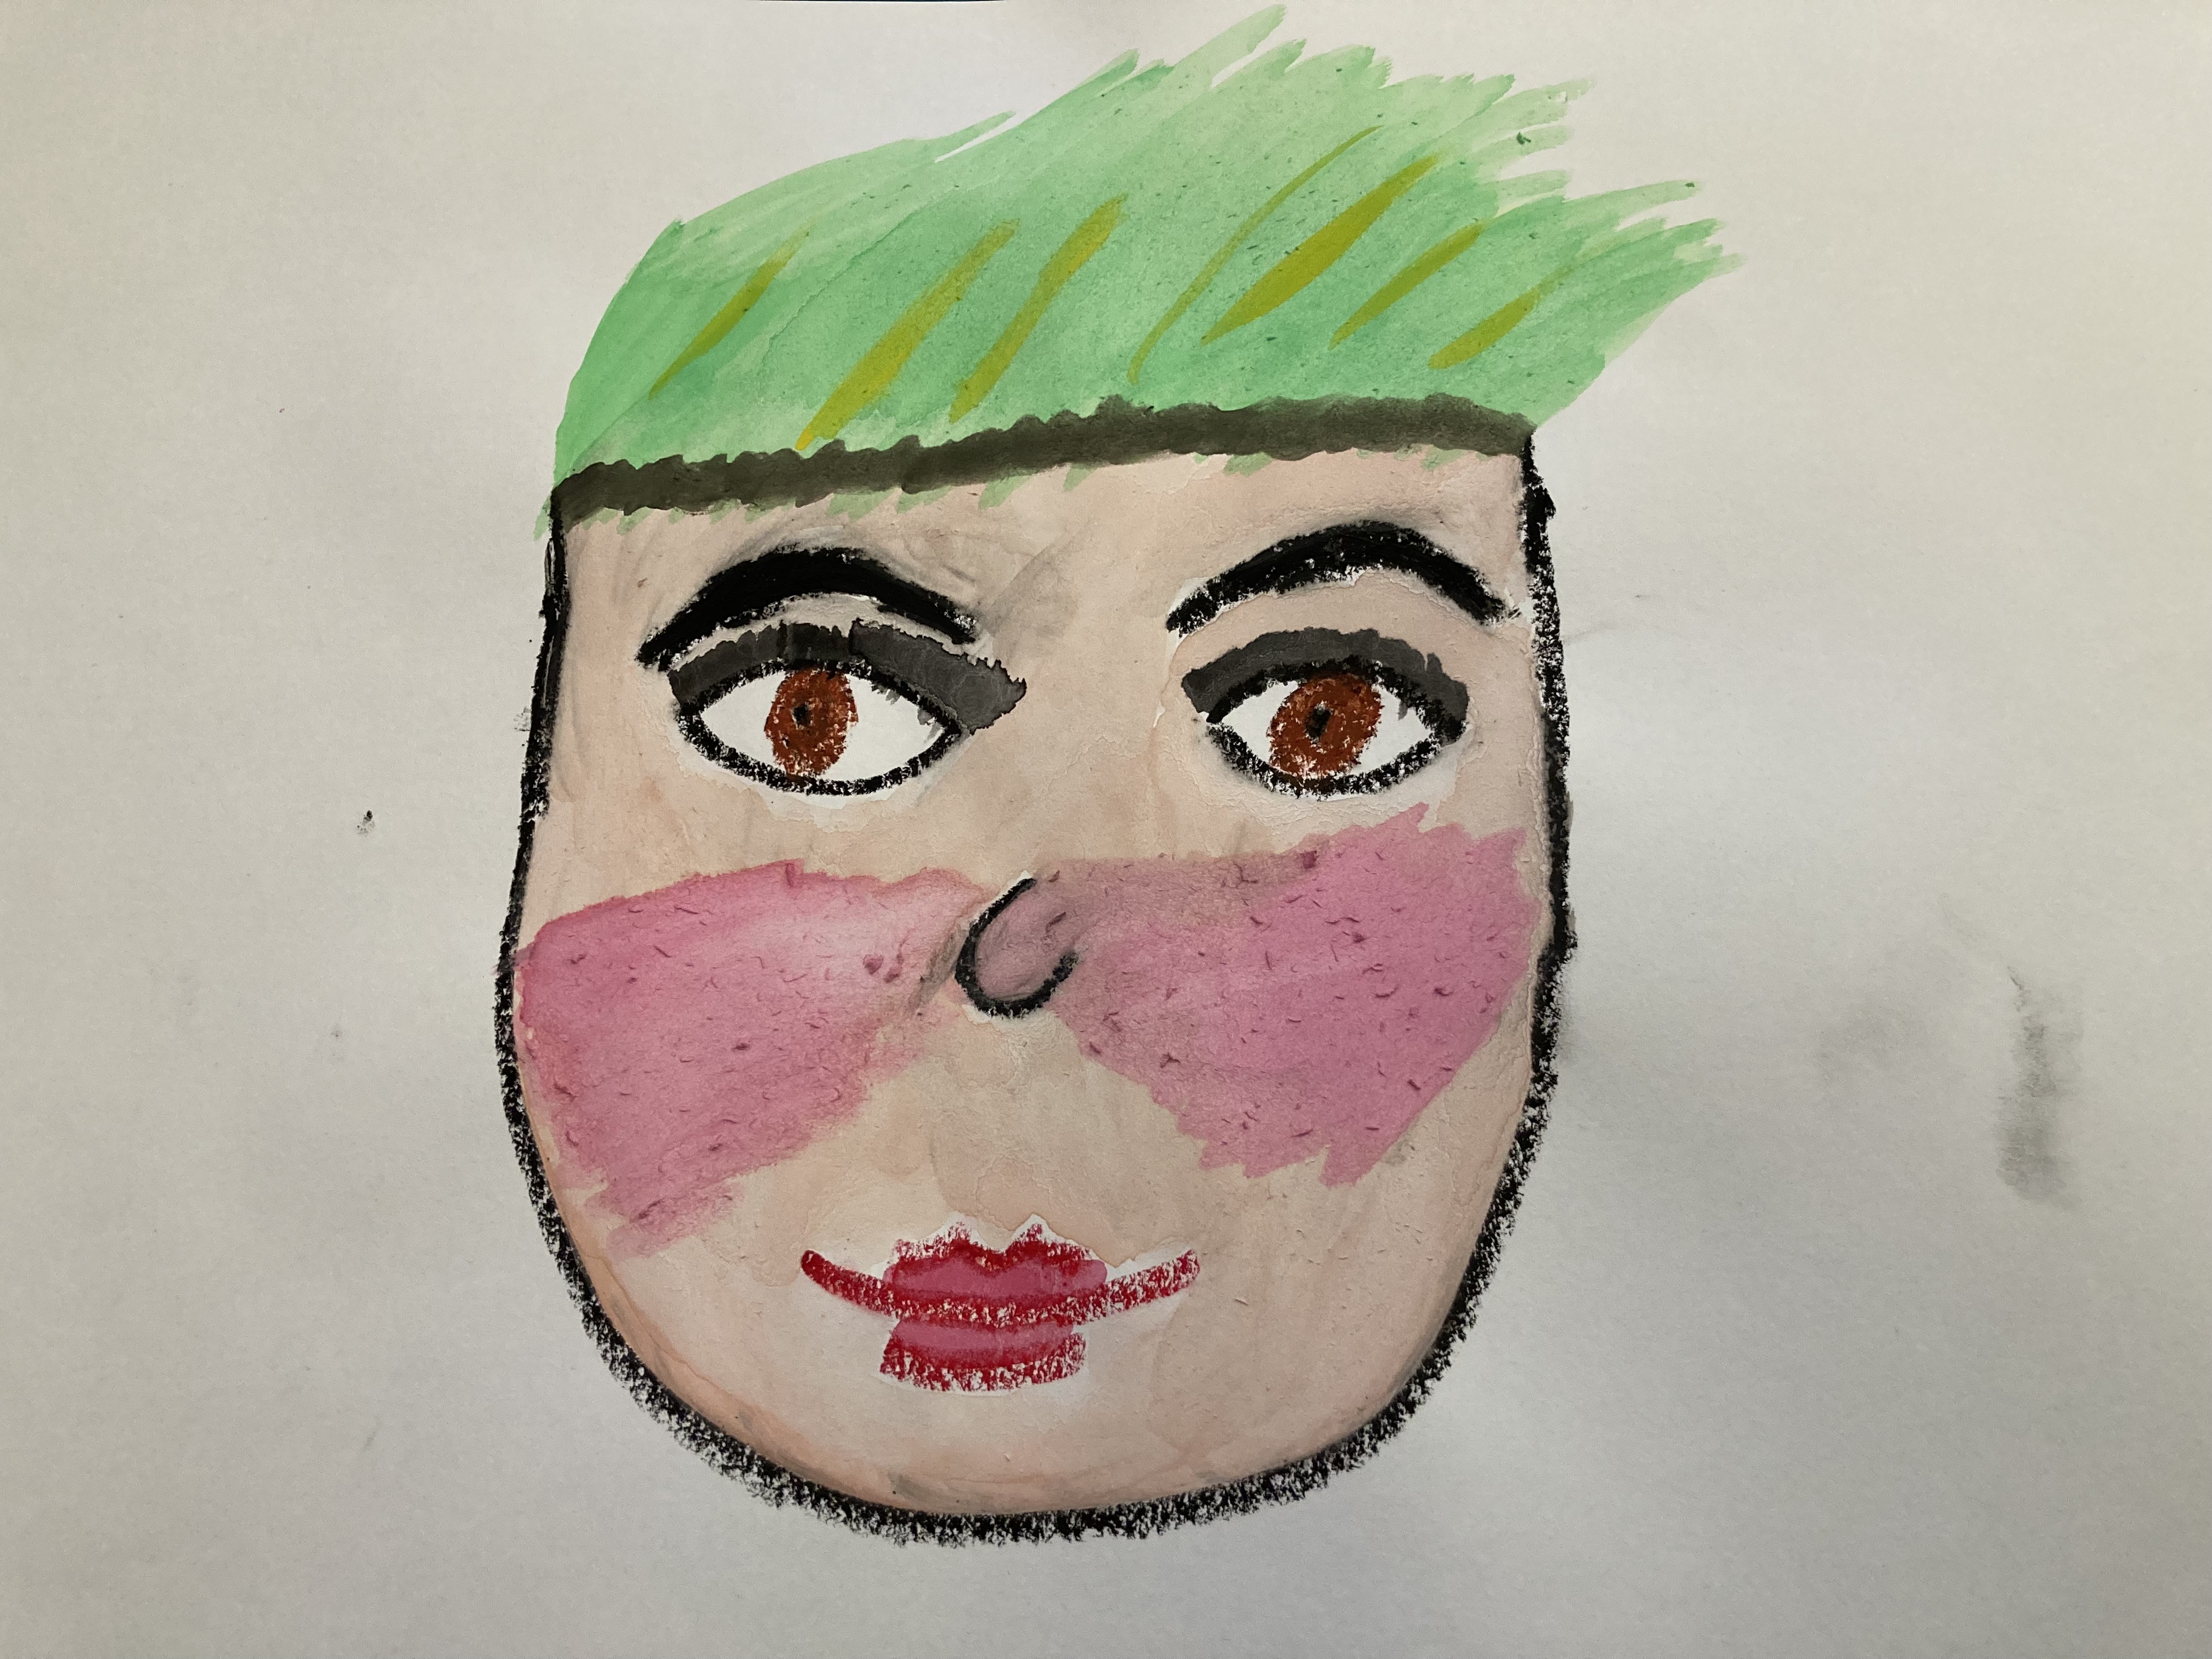 A watercolour portrait of a white person with short, spiky green hair, brown eyes and pink cheeks.